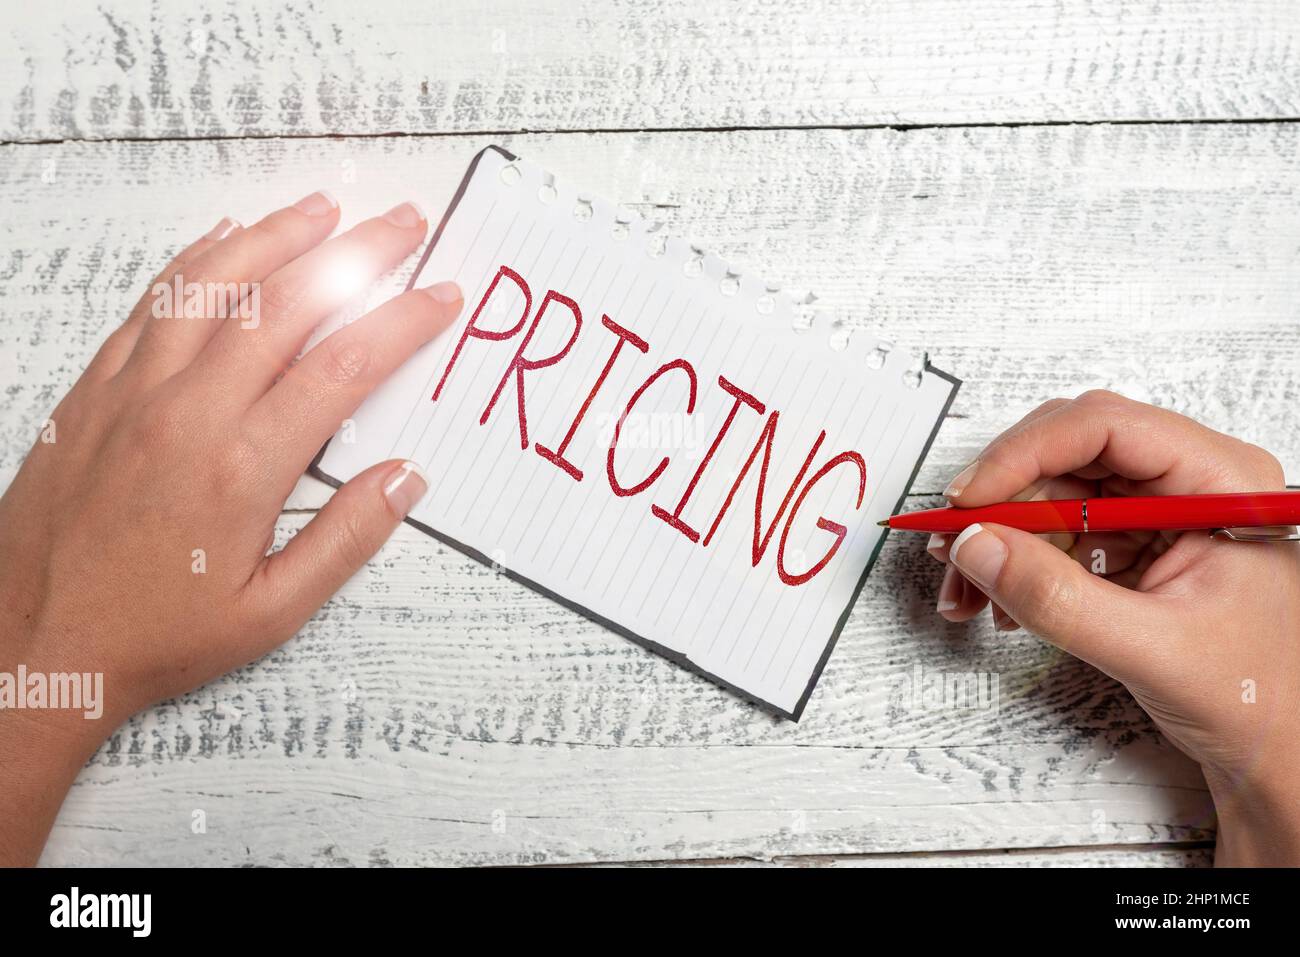 Inspiration showing sign Pricing, Business idea the method companies use to price their products or services Brainstorming Problems And Solutions Aski Stock Photo